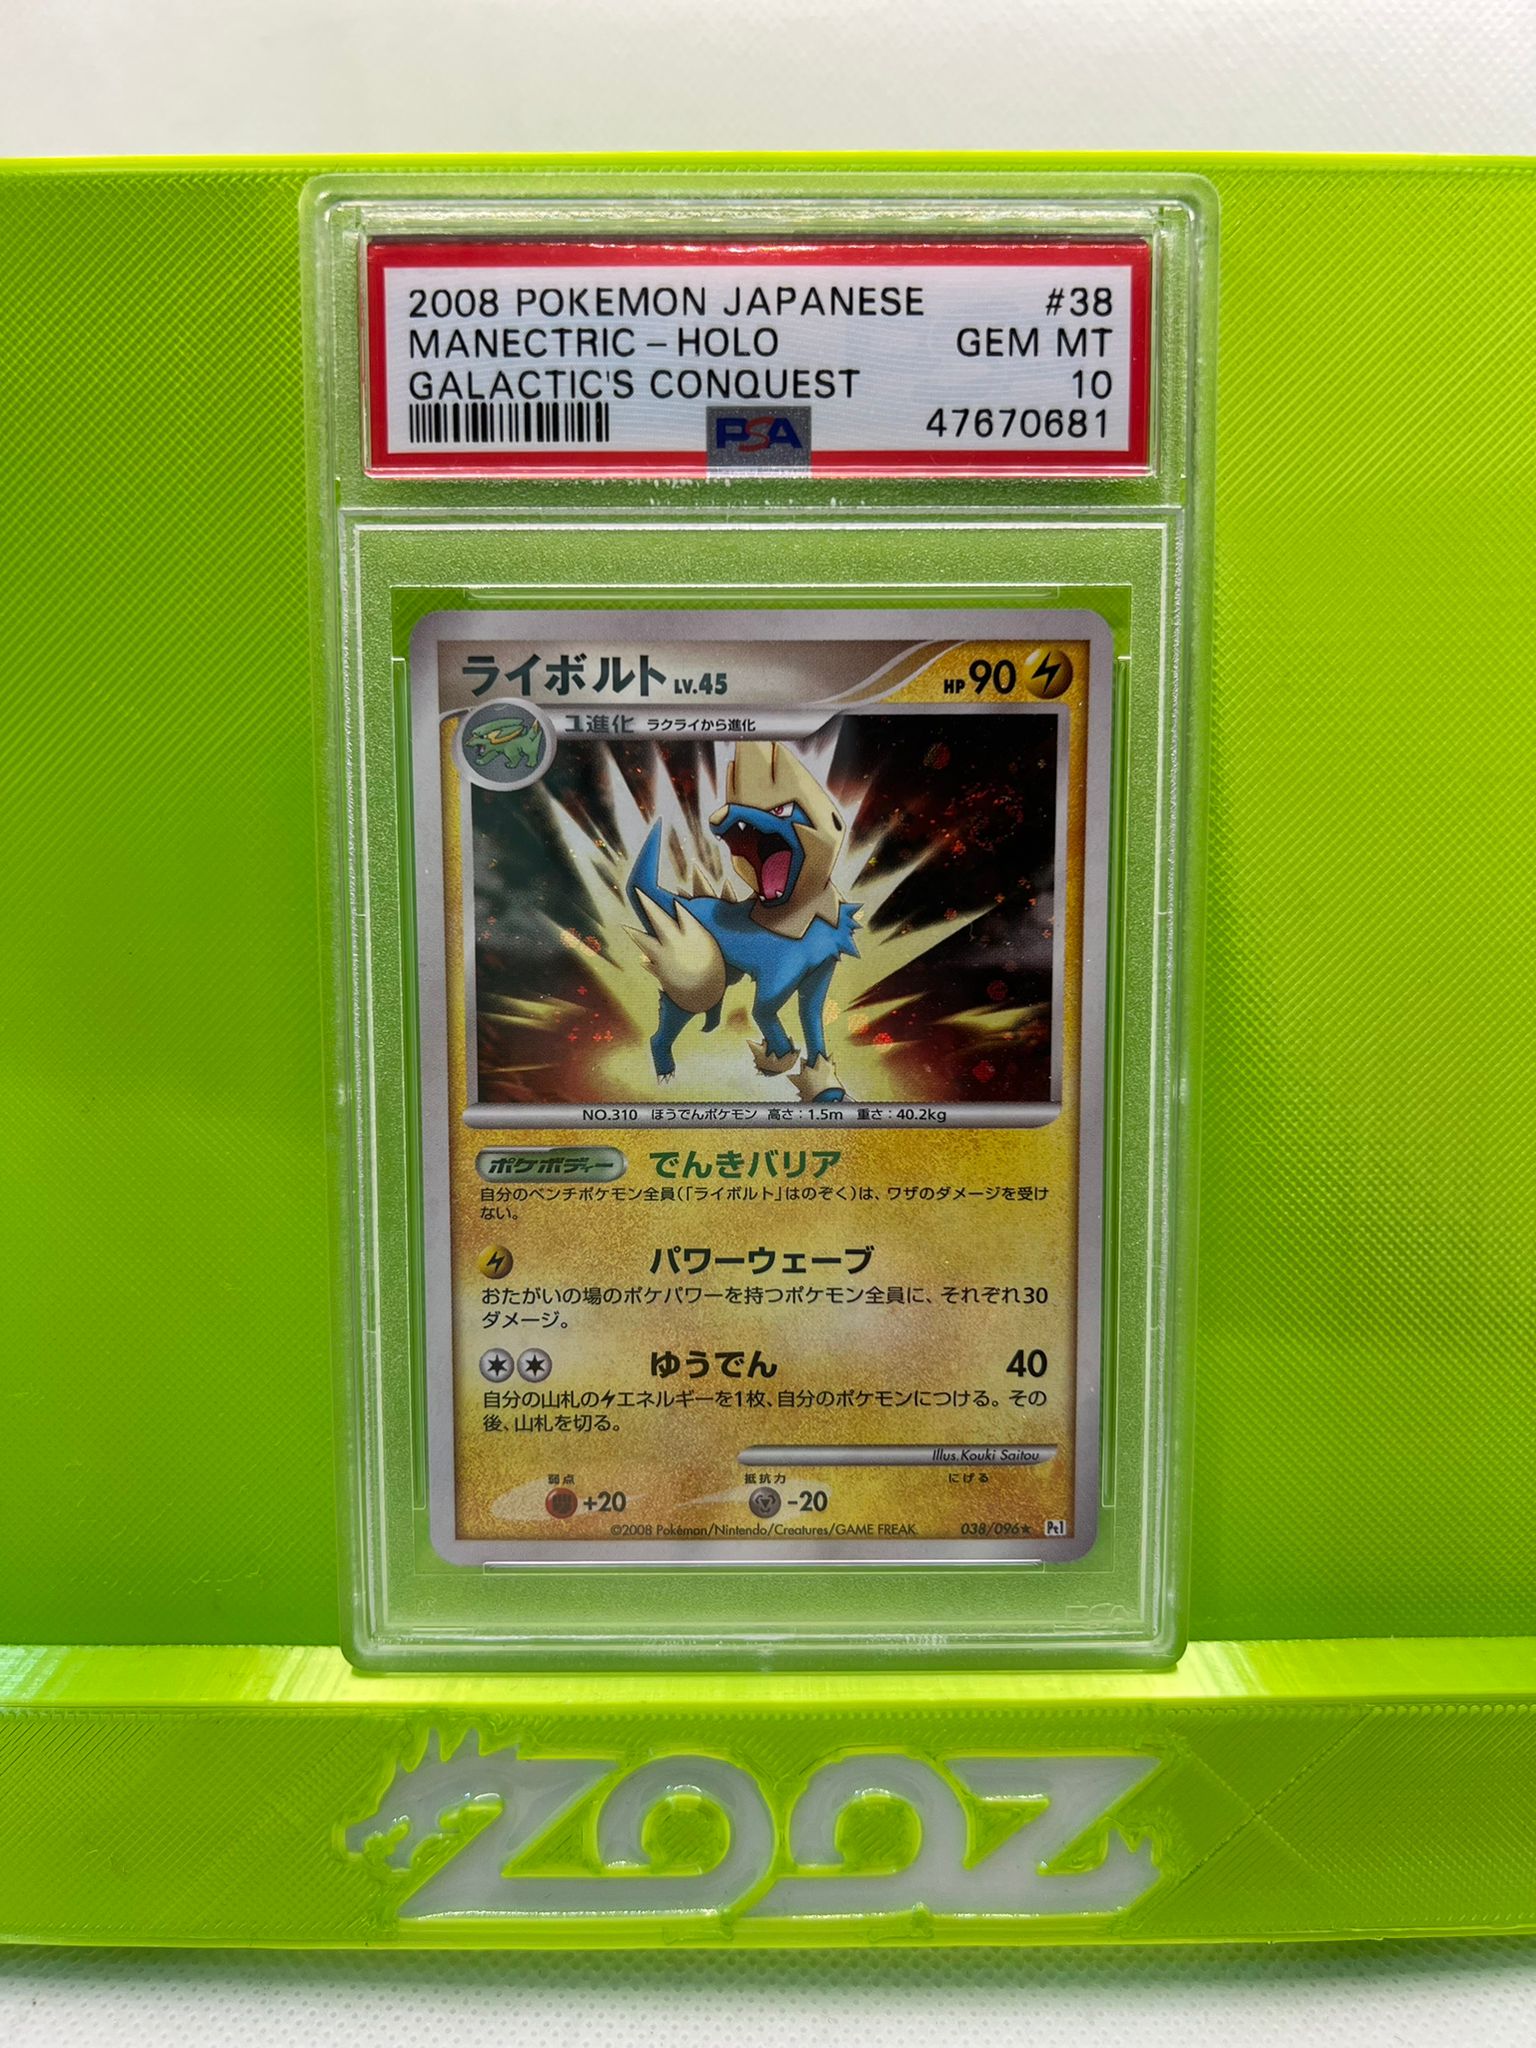 PSA 10 Pokemon Japanese Manectric #38 Galactic's Conquest Holo